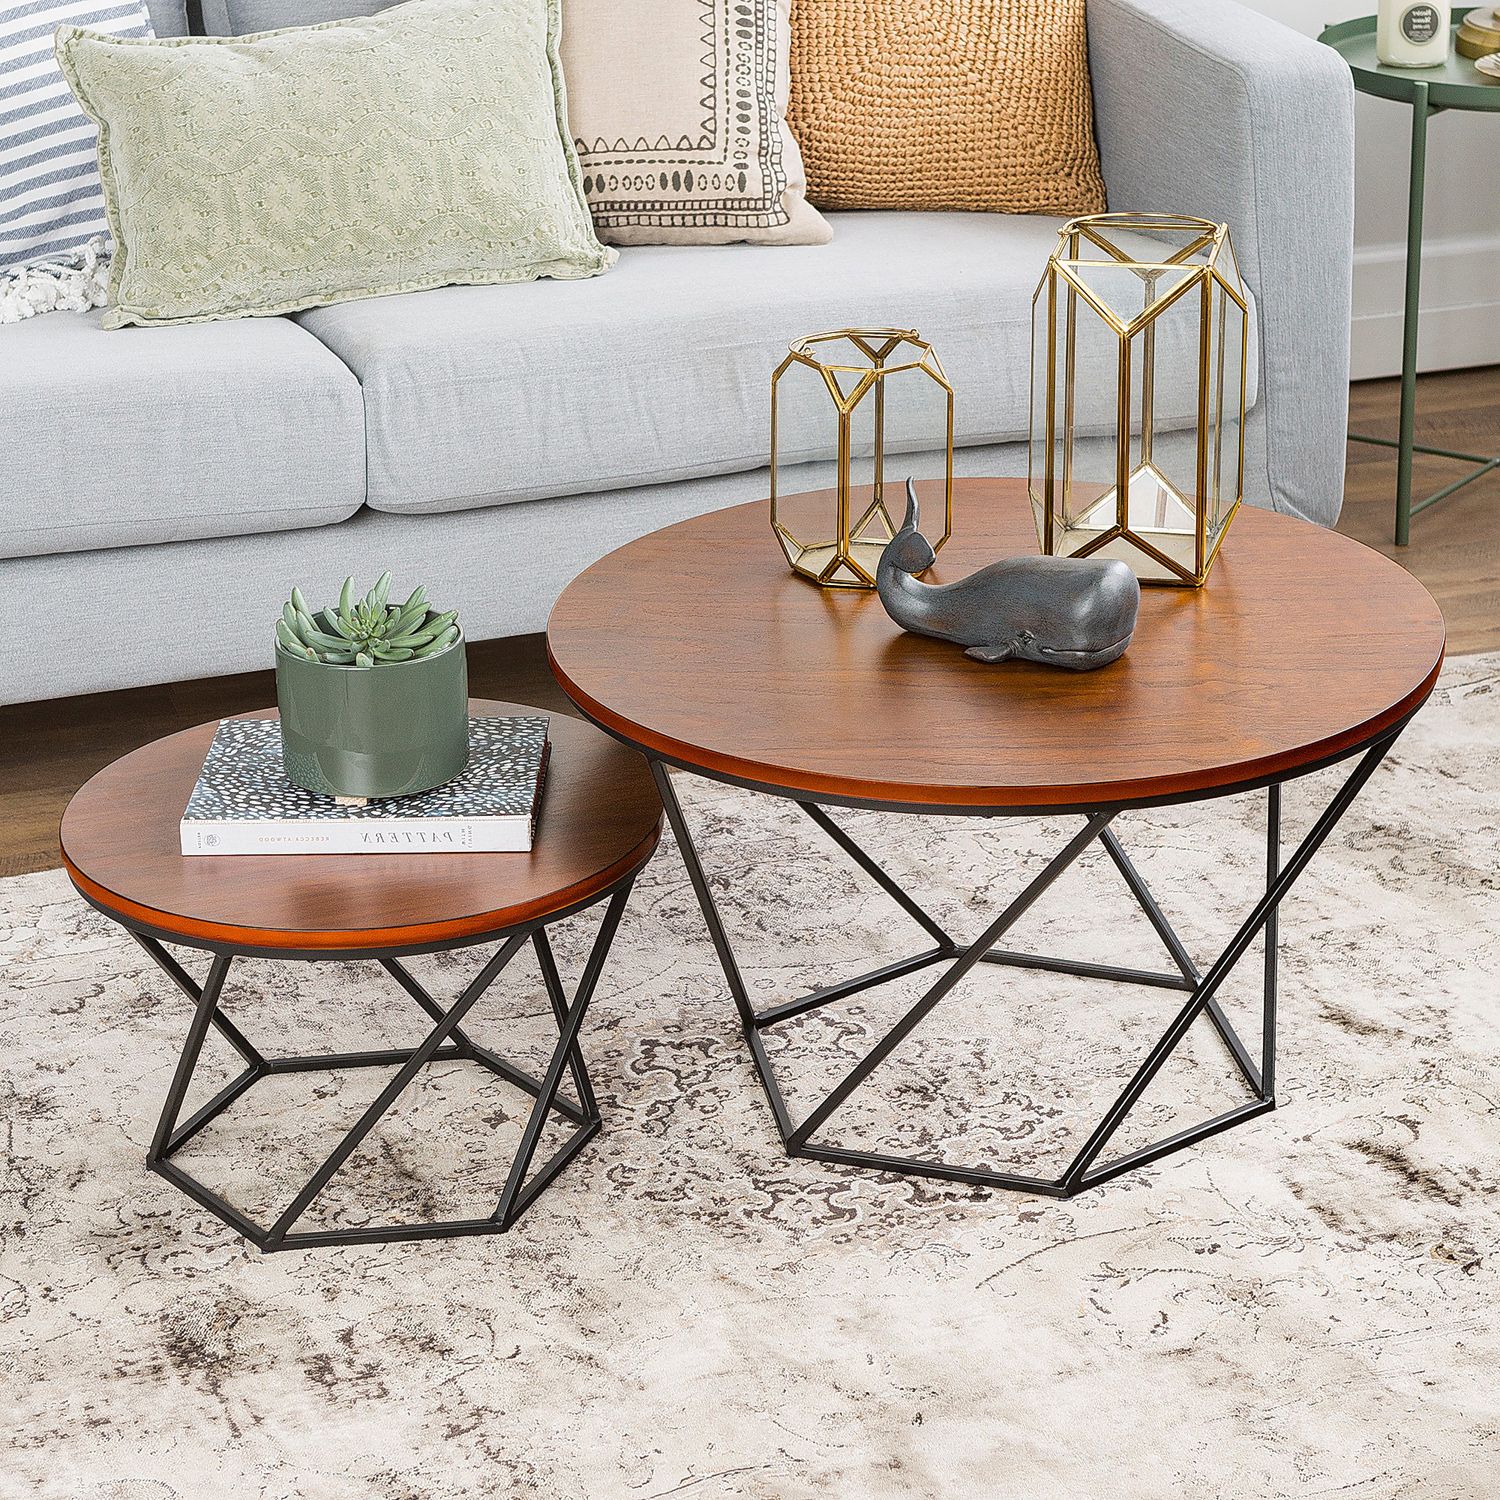 Black Wood Storage Coffee Tables With Current Geometric Black & Walnut Wood Nesting Coffee Tables – Pier (View 8 of 10)